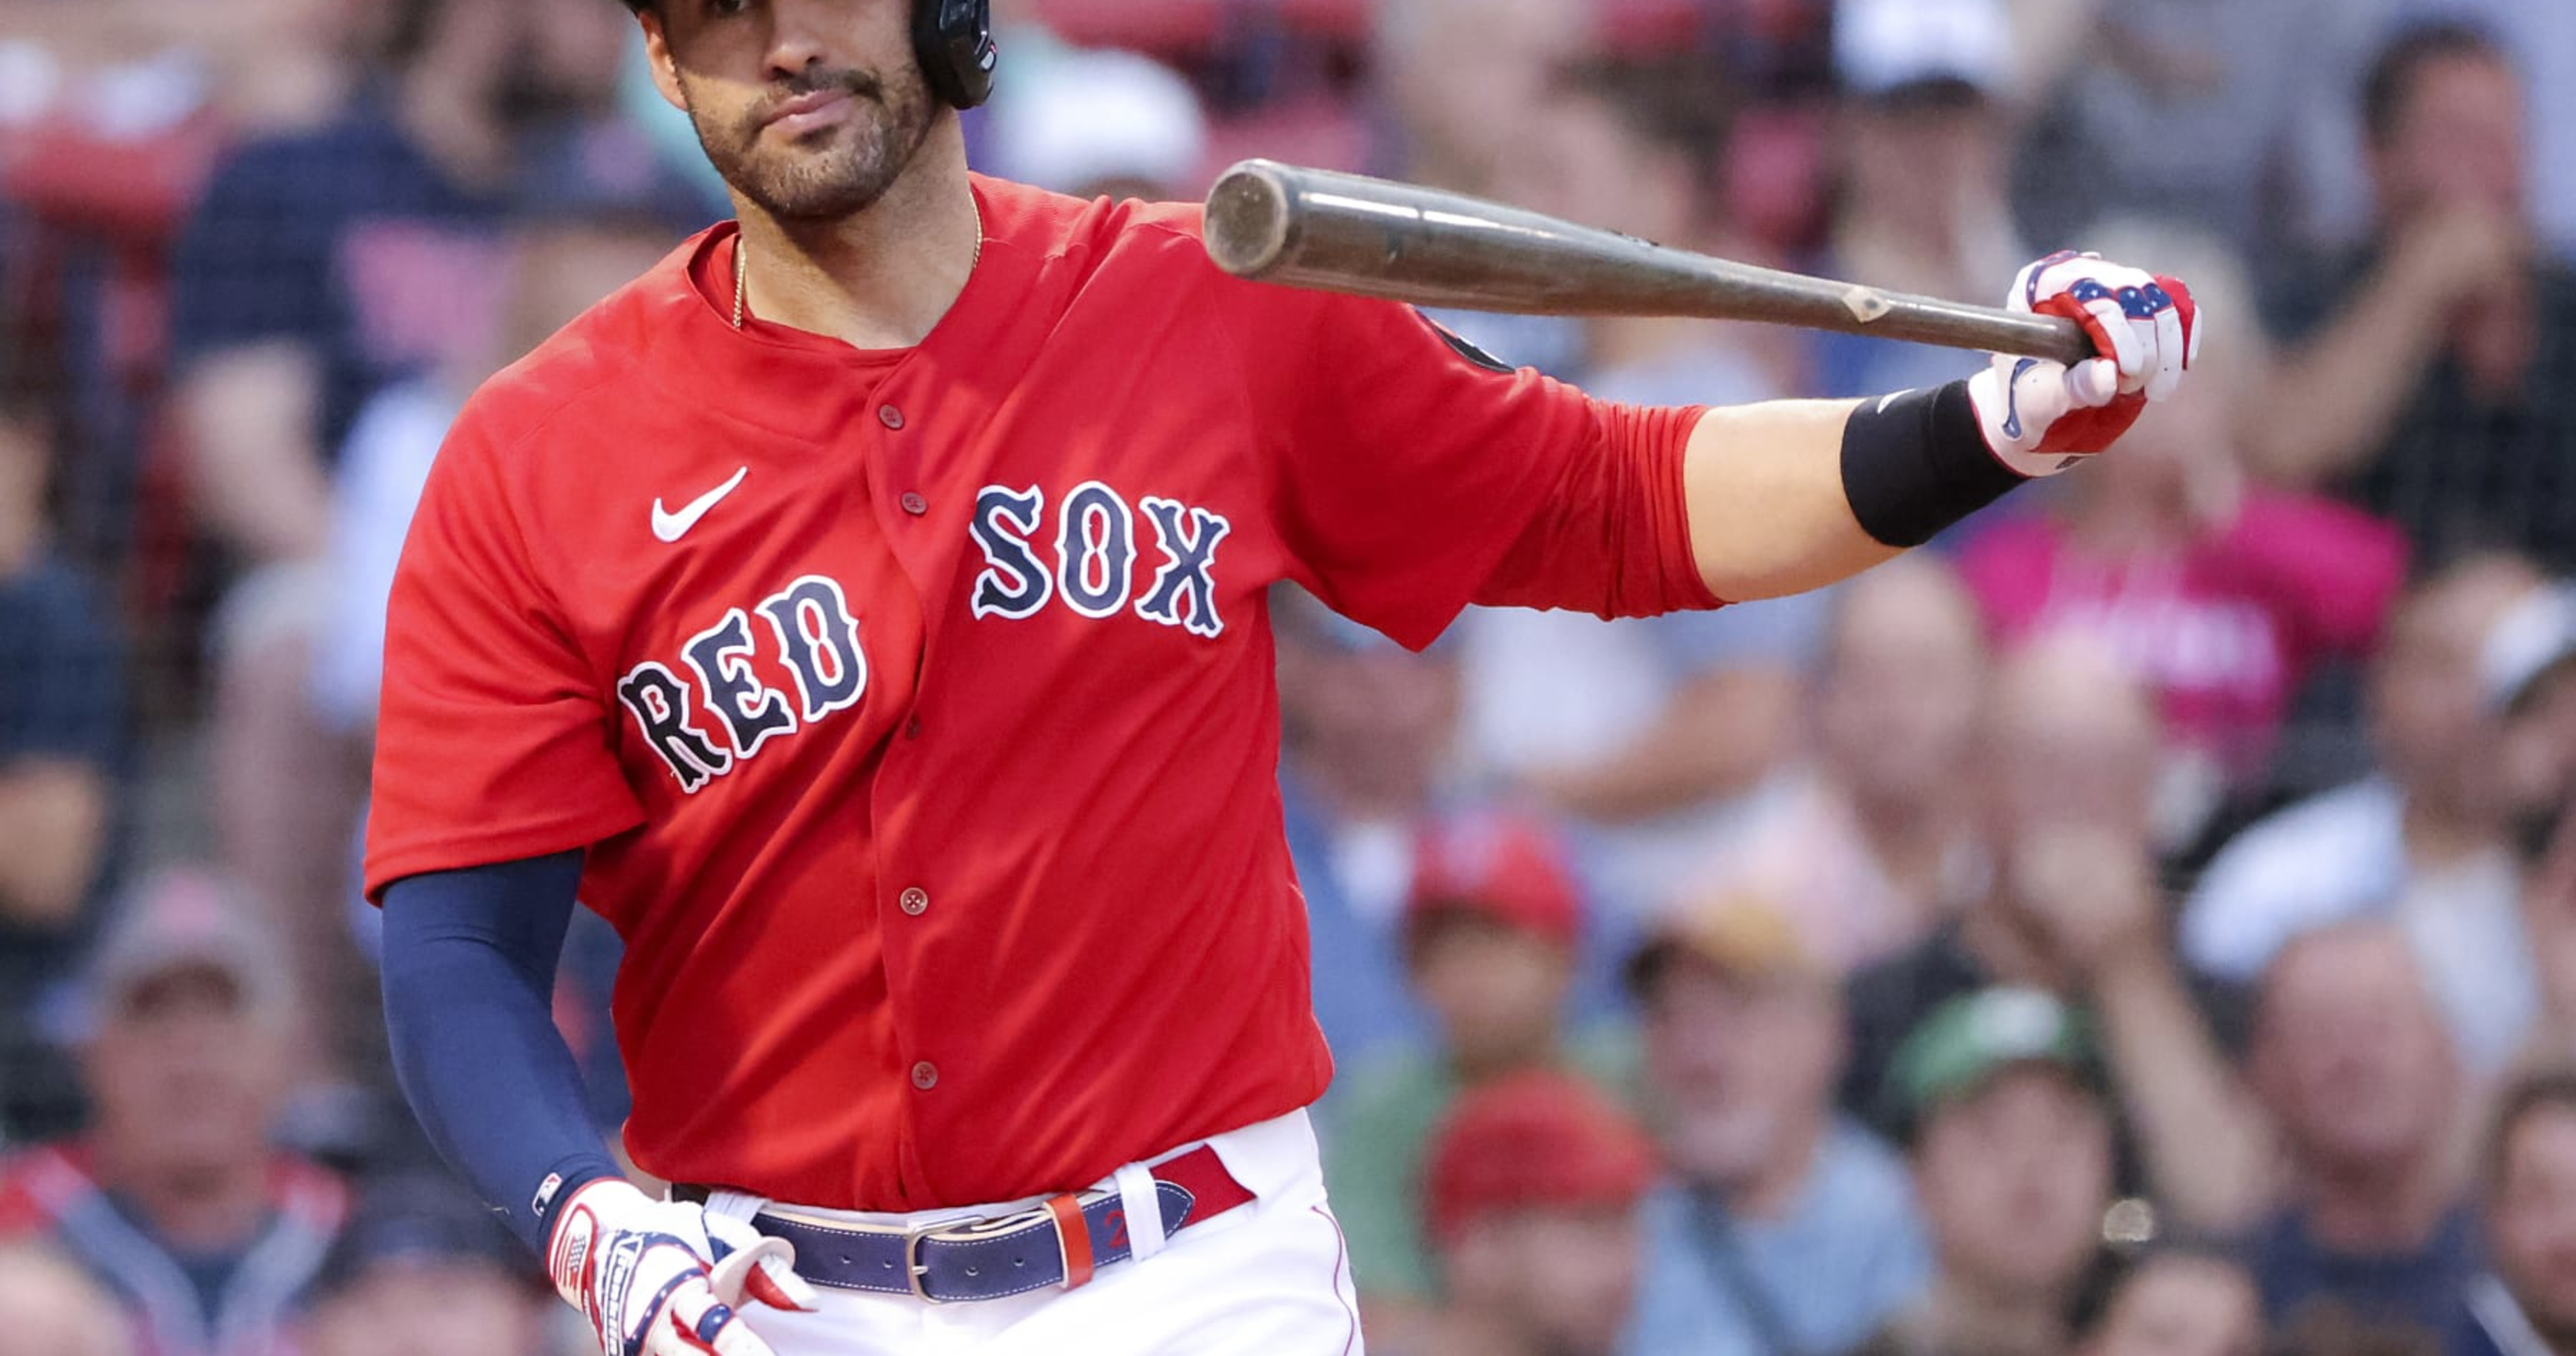 MLB trade rumors: J.D. Martinez signs with Boston Red Sox - Bless